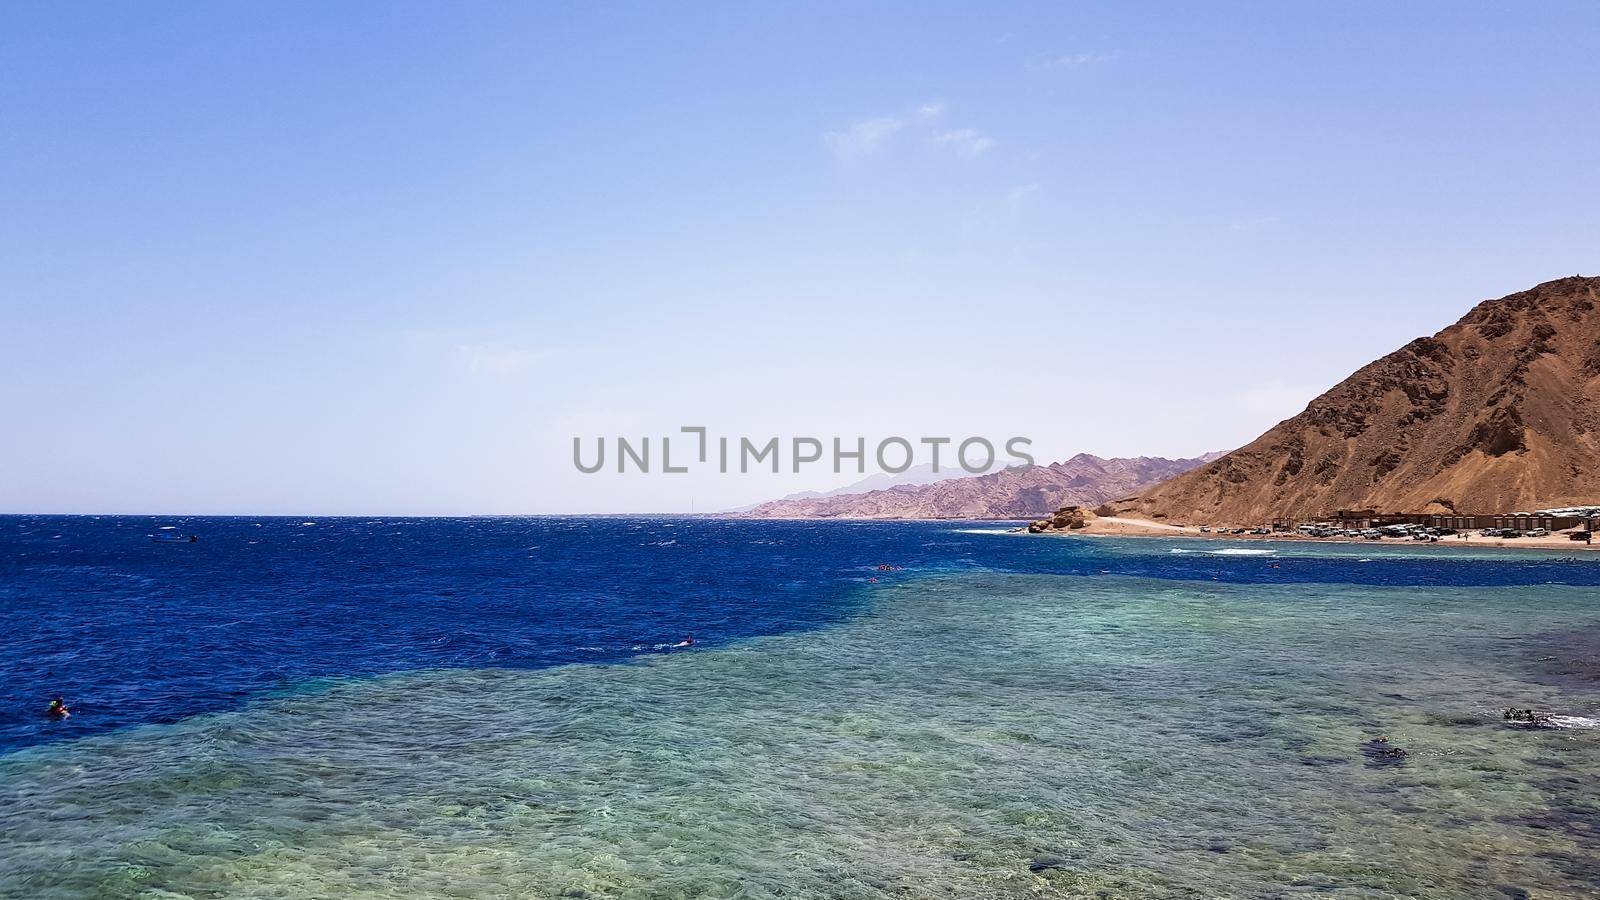 The Blue Hole is a popular diving spot in East Sinai. Sunny beach resort on the Red Sea in Dahab. A famous tourist destination near Sharm el Sheikh. Bright sunshine.